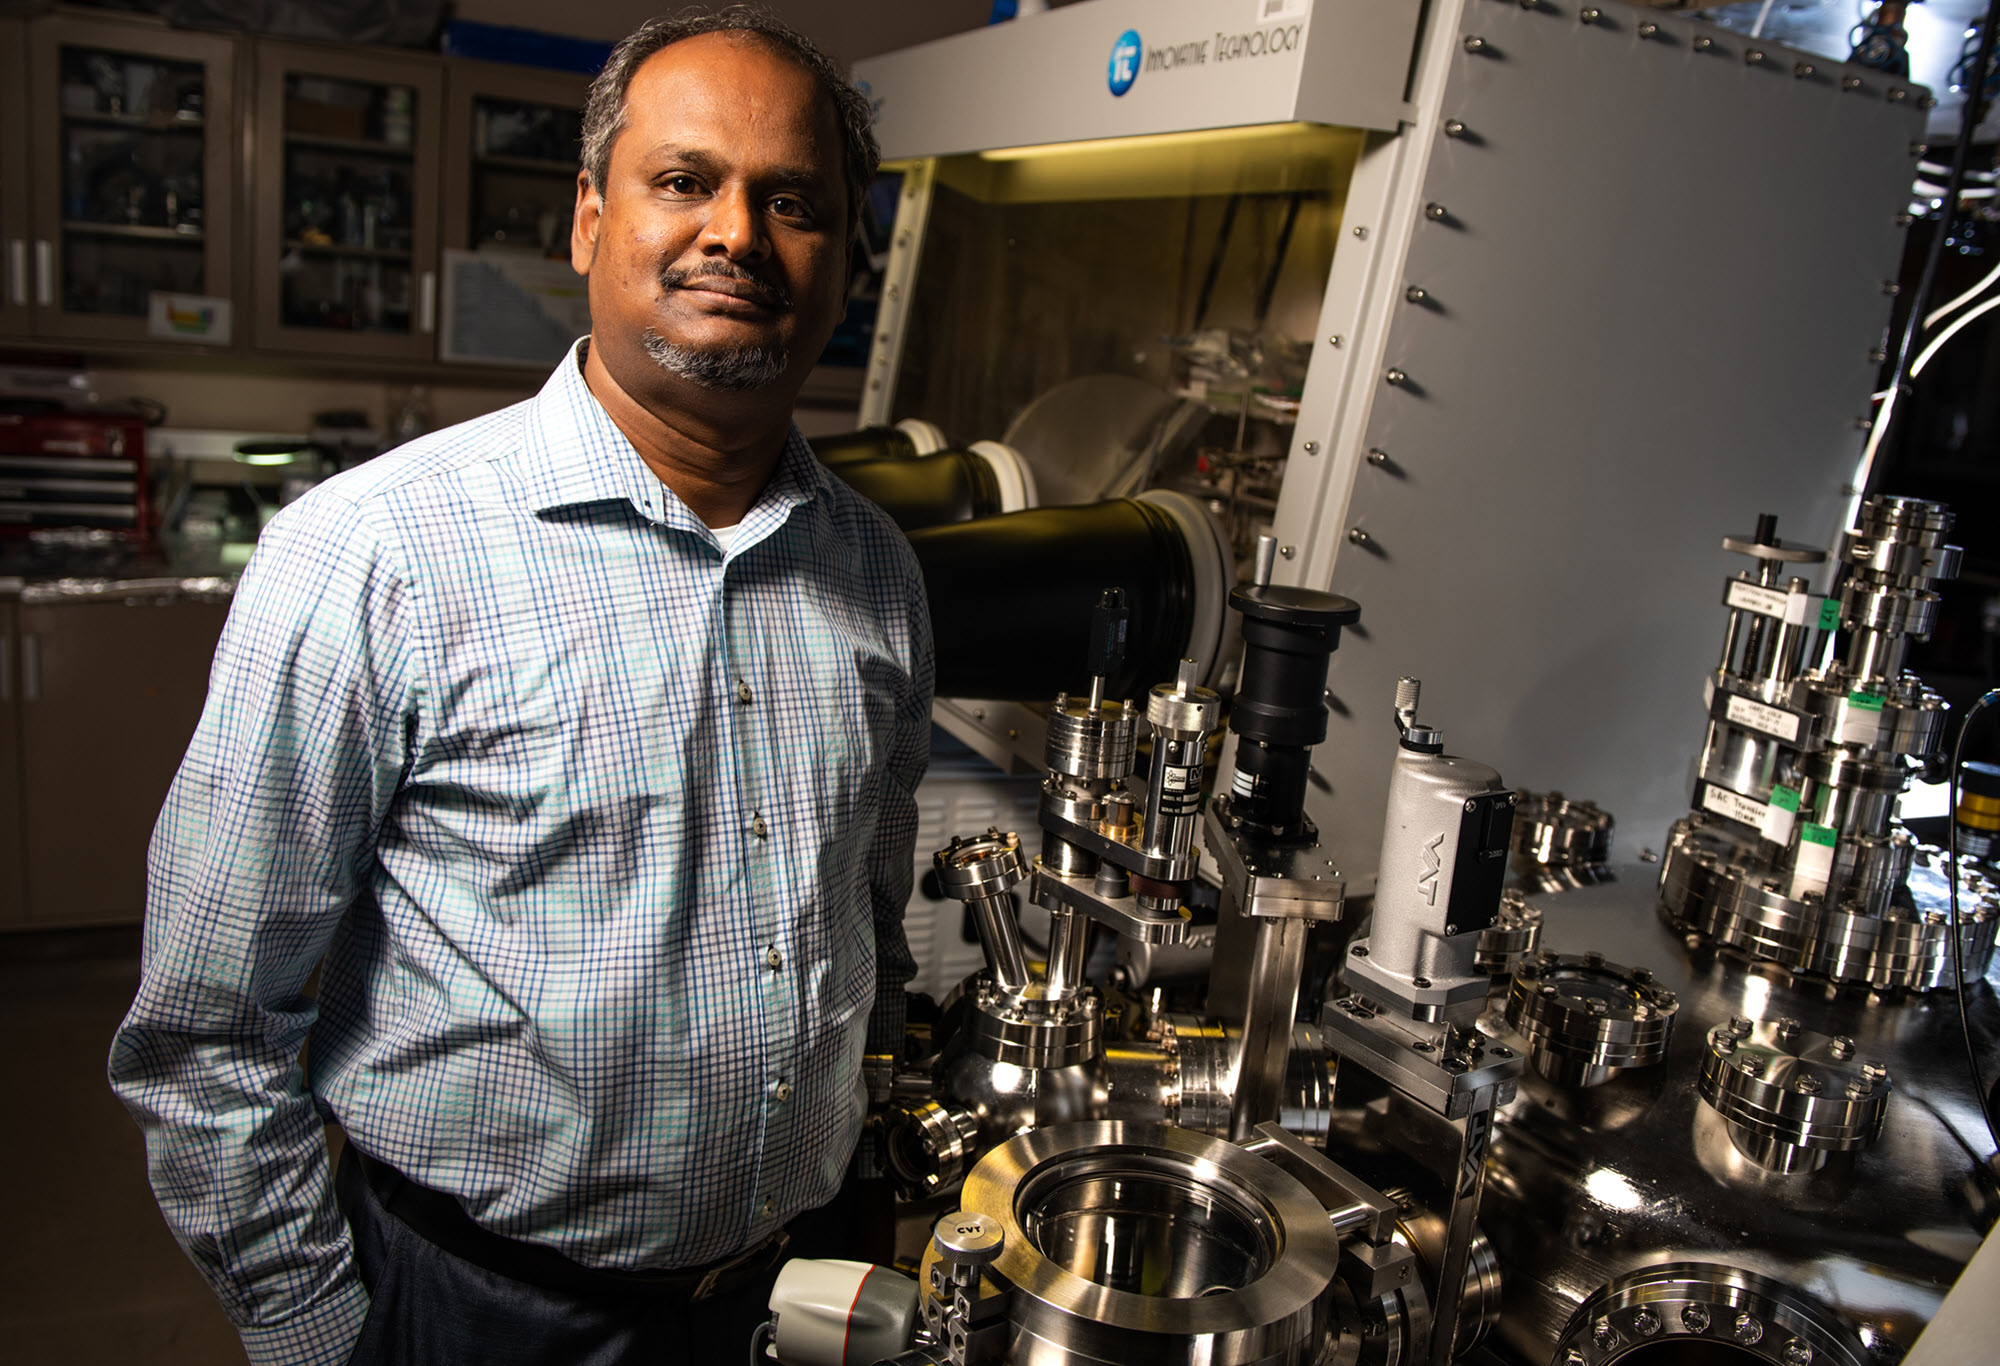 Portrait of Vijay Murugesan, material sciences group lead at Pacific Northwest National Laboratory, in the lab setting.